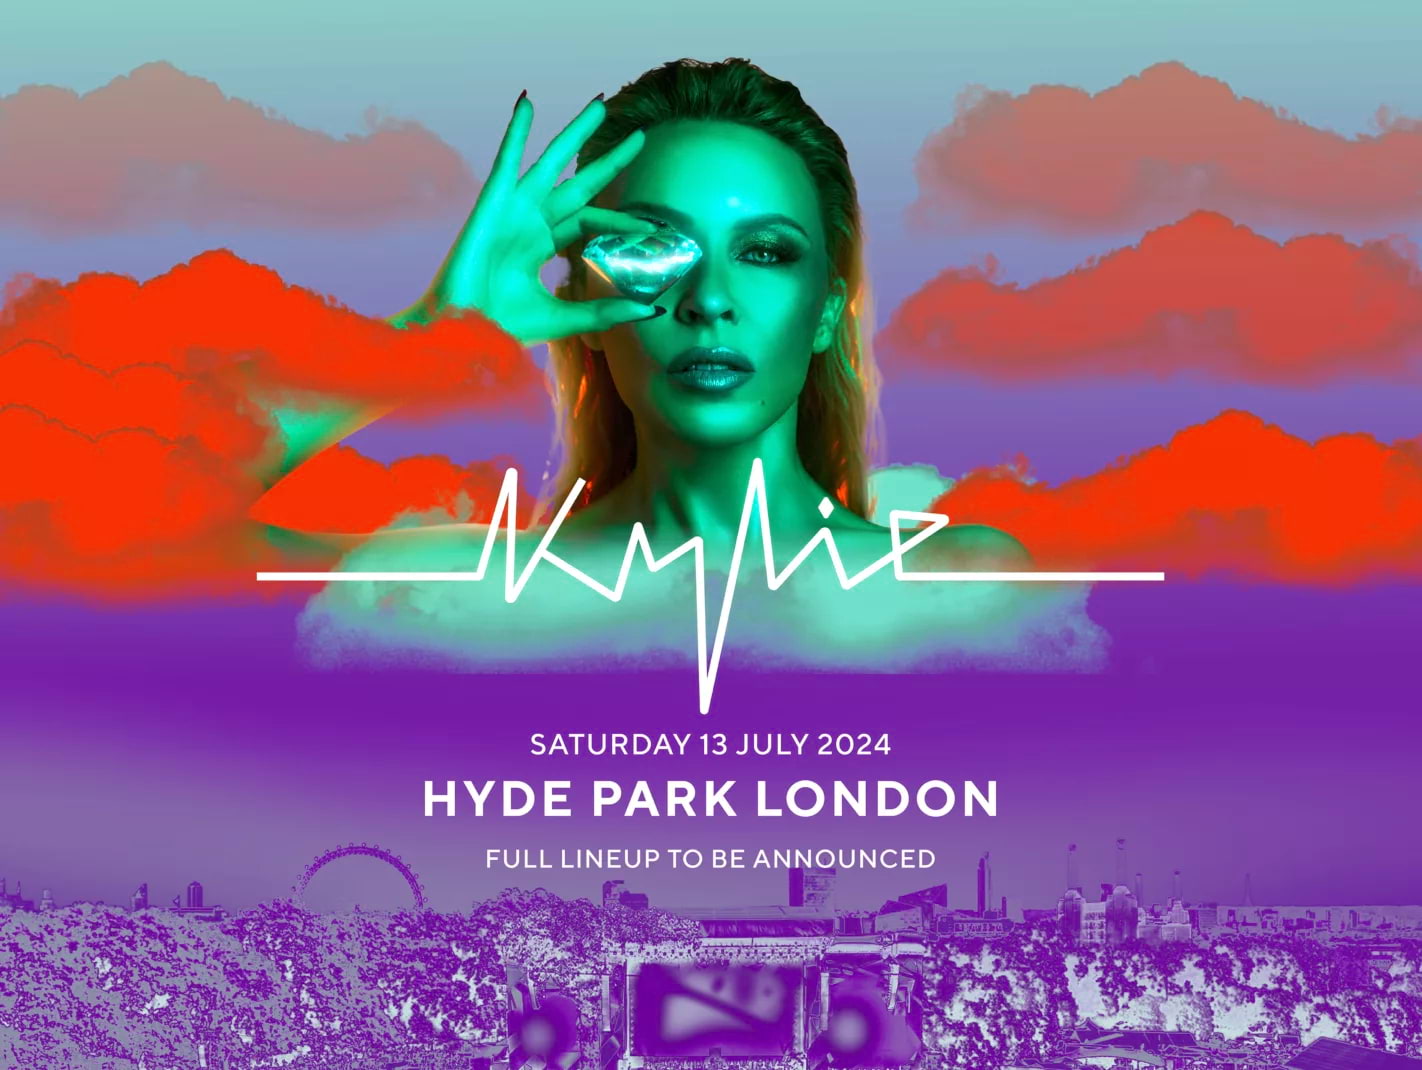 Pop legend Kylie Minogue is coming to Hyde Park this summer